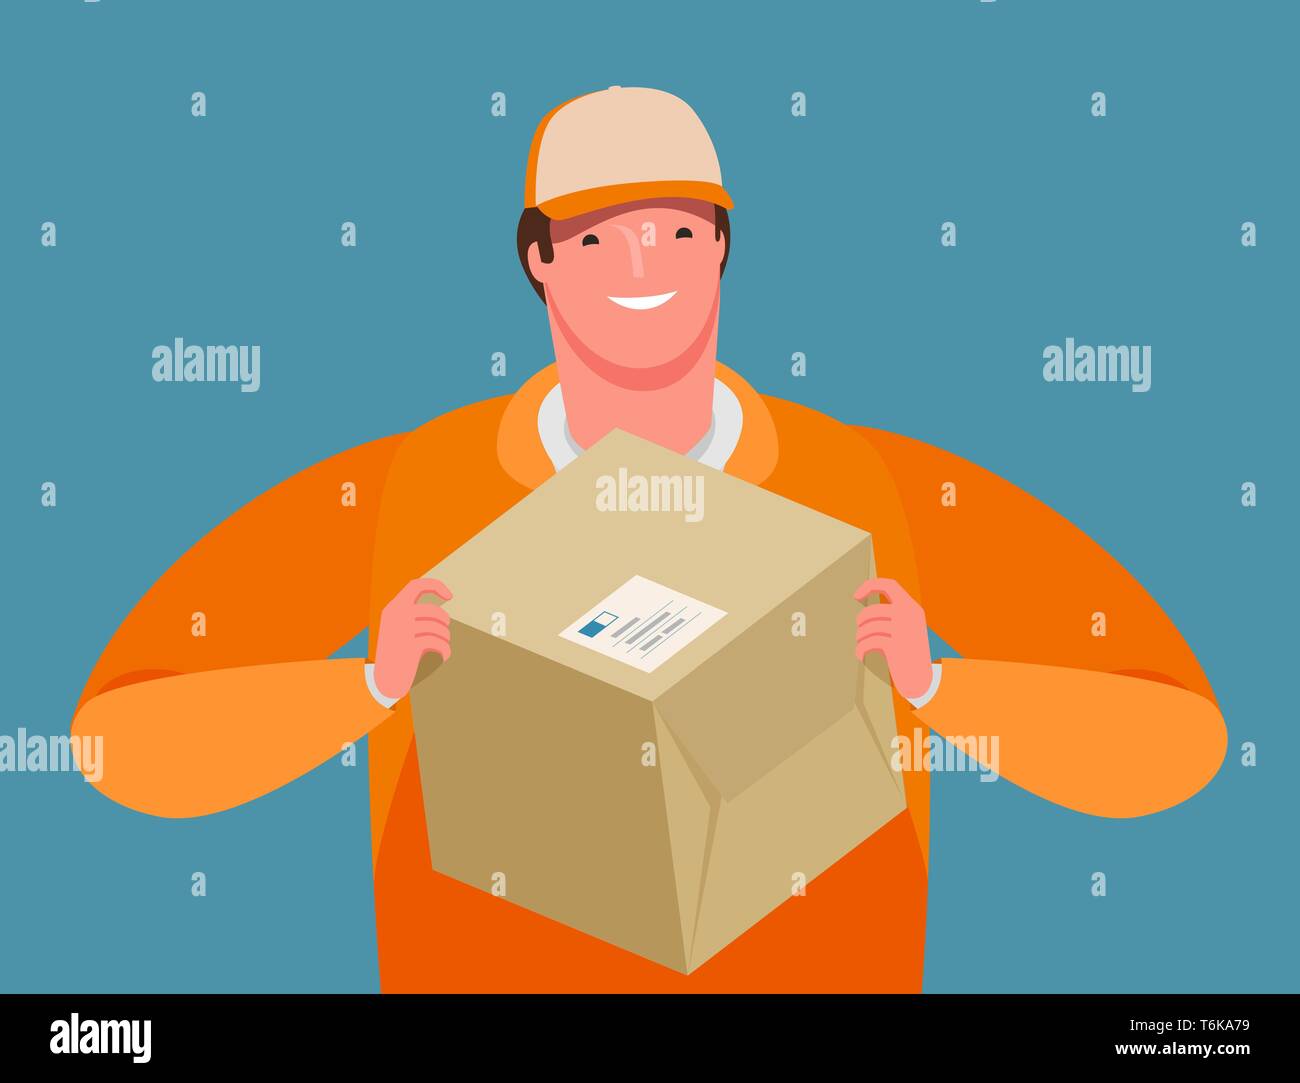 Business delivery. Courier hands a parcel. Cartoon vector illustration Stock Vector